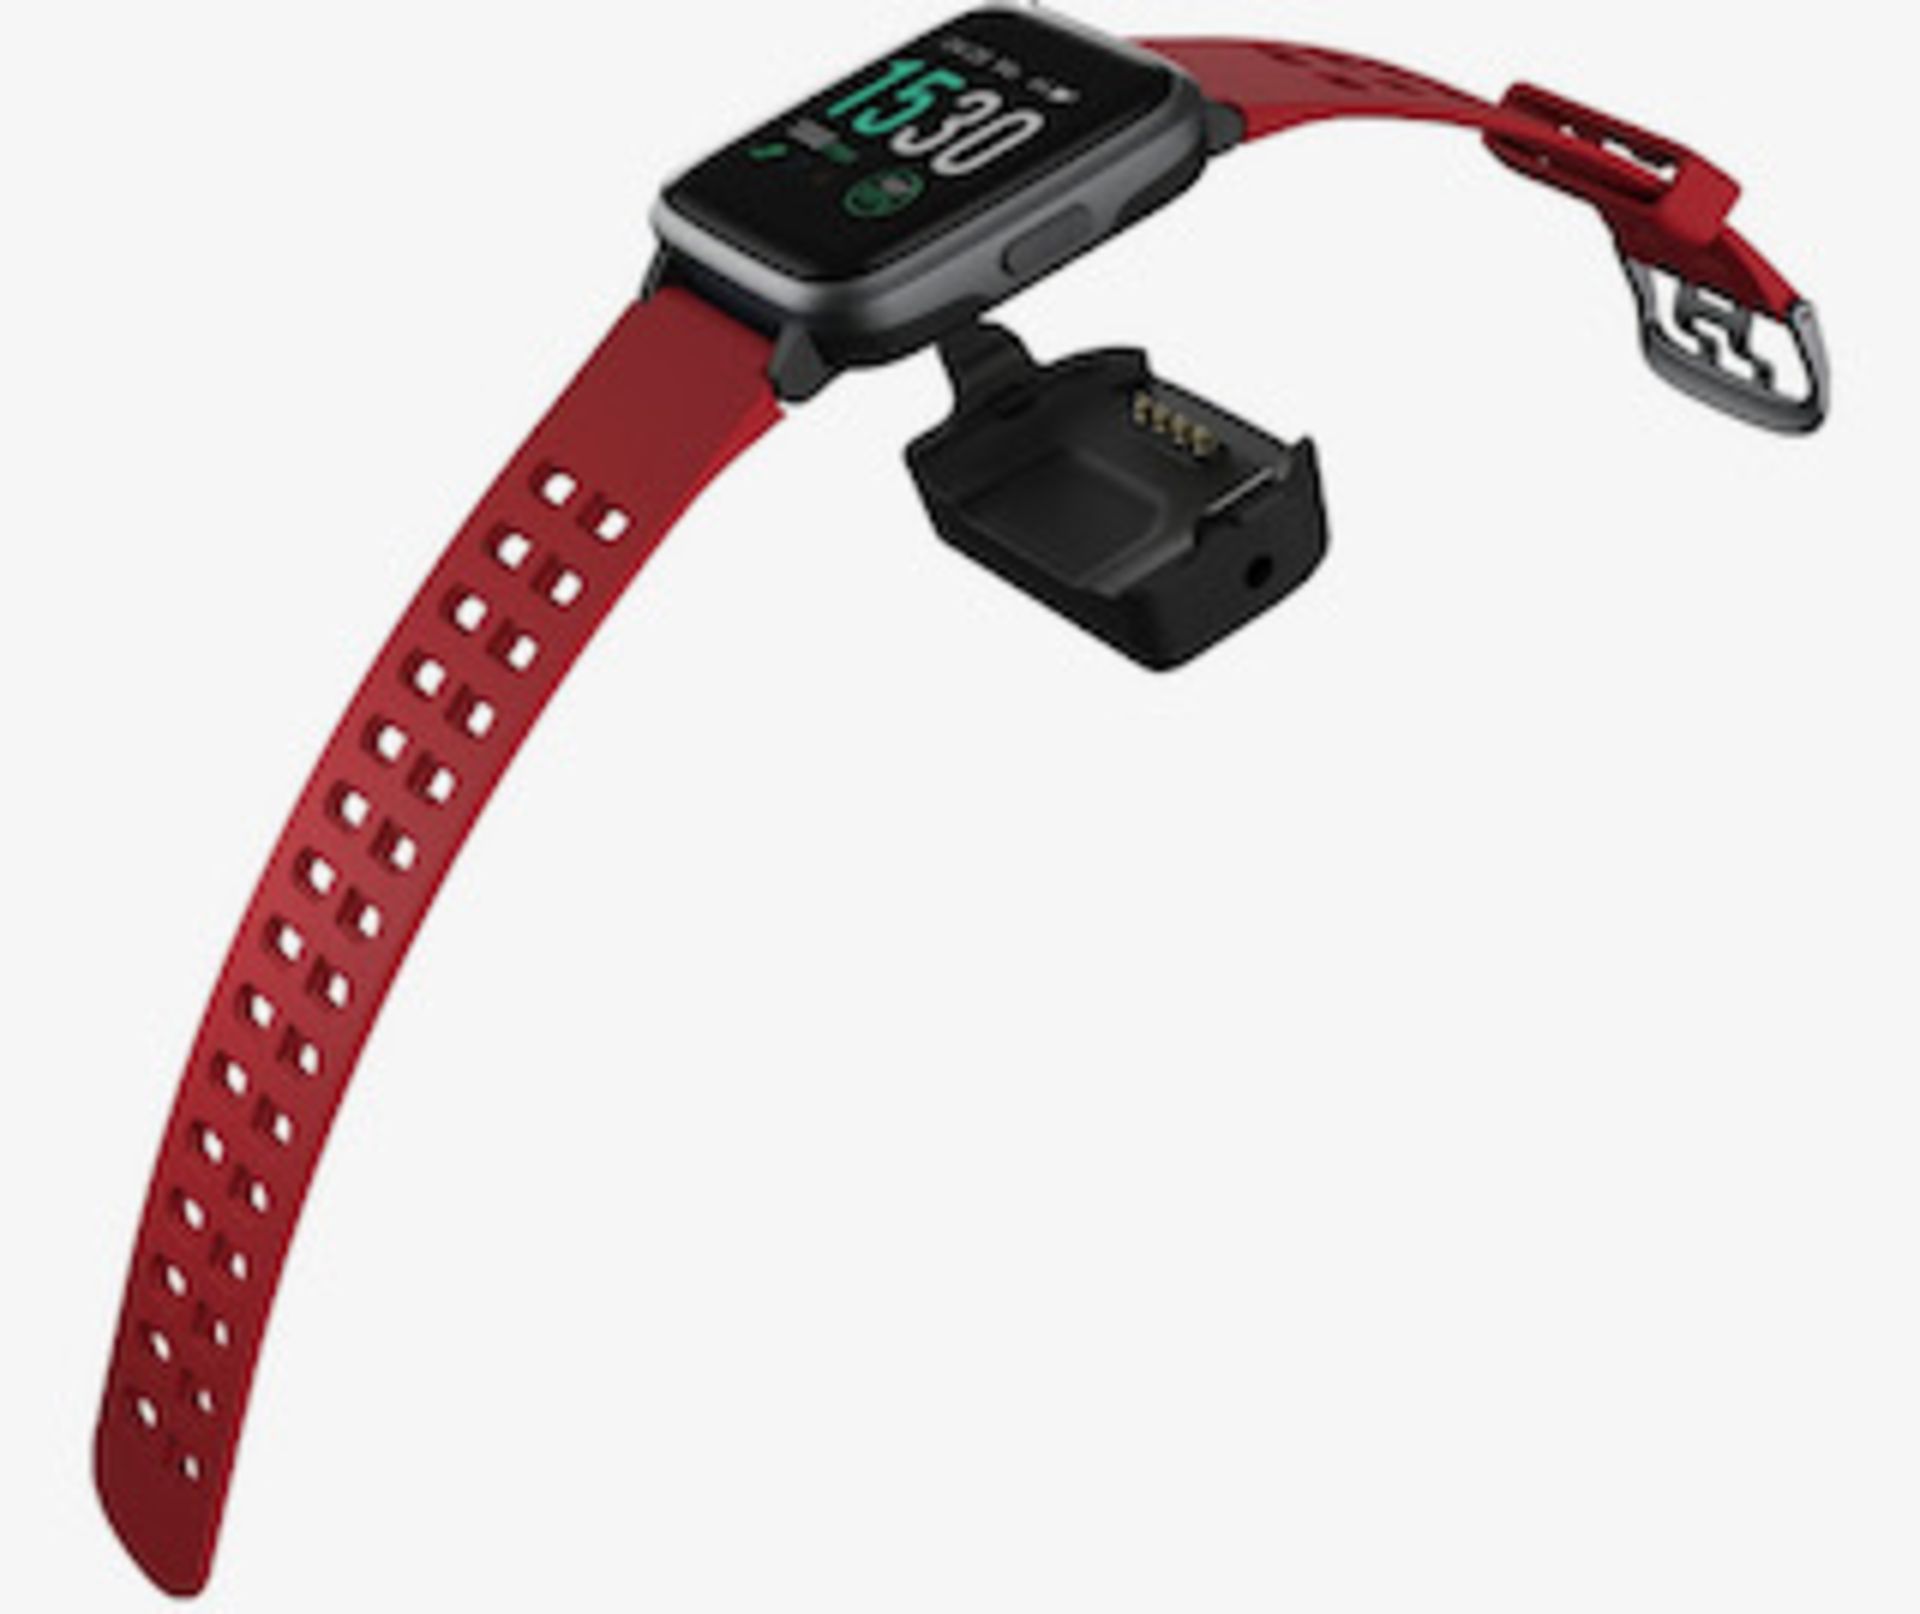 Brand New Unisex Fitness Tracker Watch Id205 Red Strap About This Item 1.3-Inch LCD Colour - Image 24 of 34